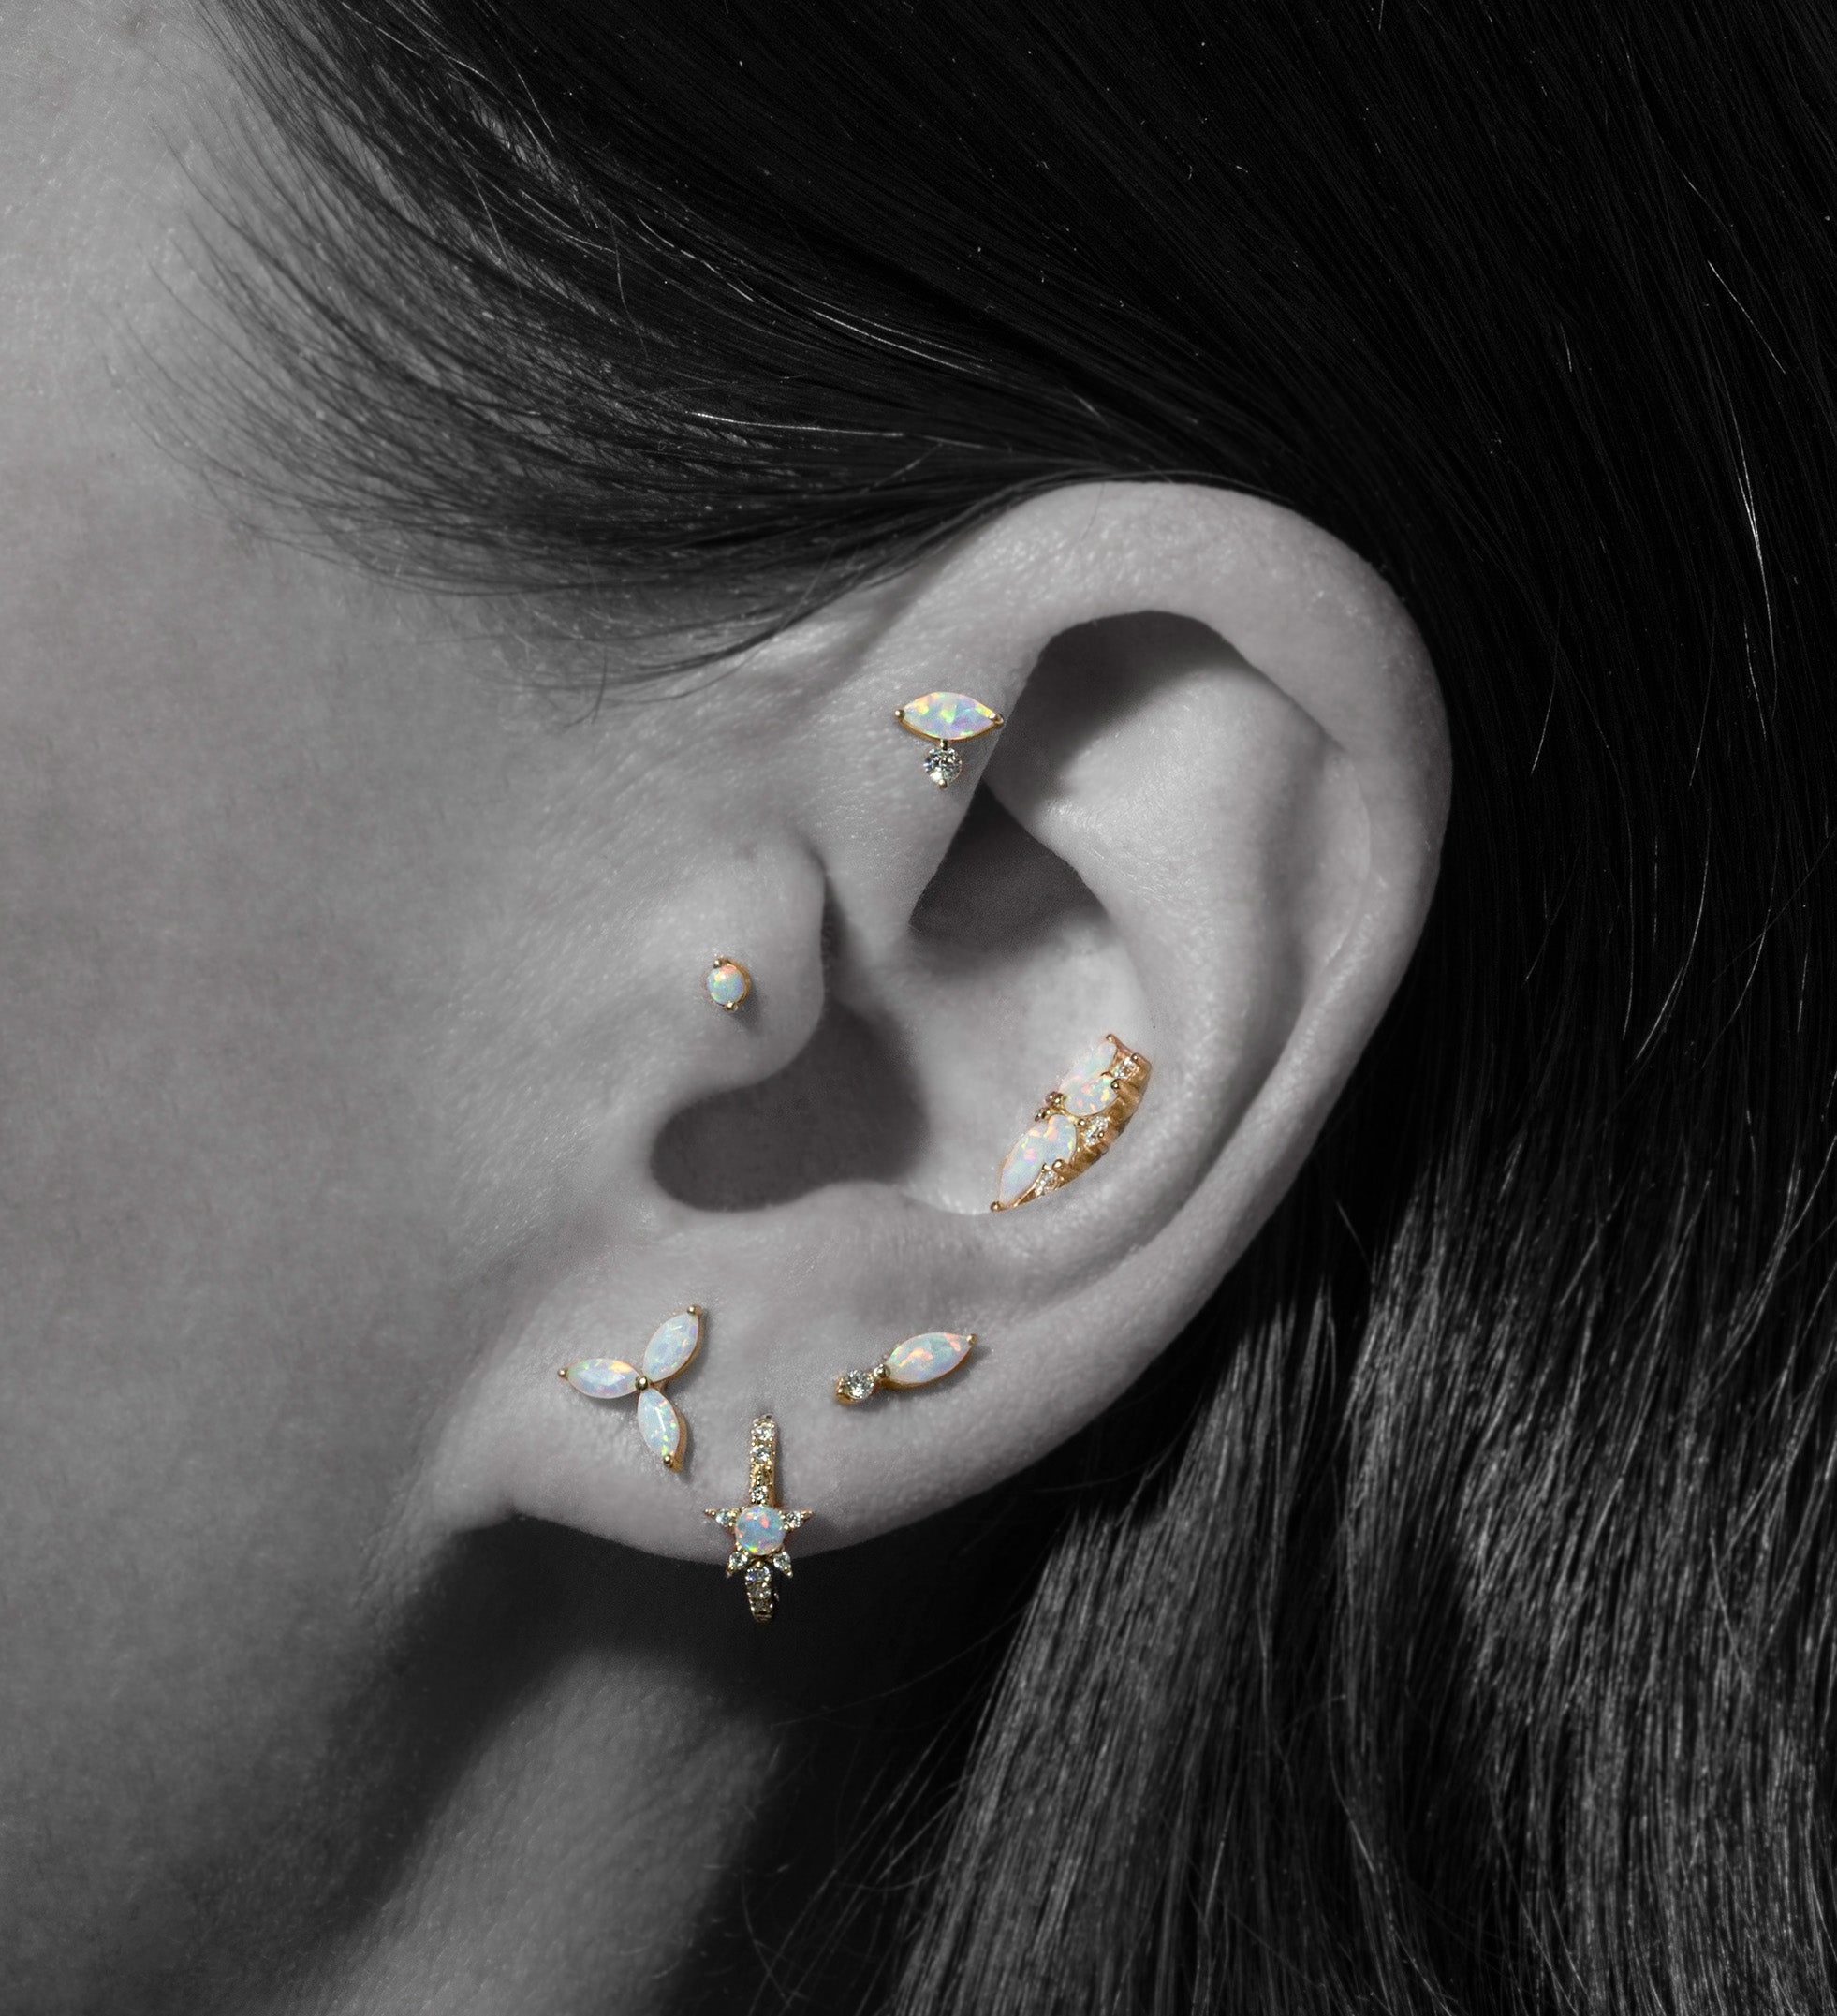 Jewelry for ear piercing and body piercing on white background